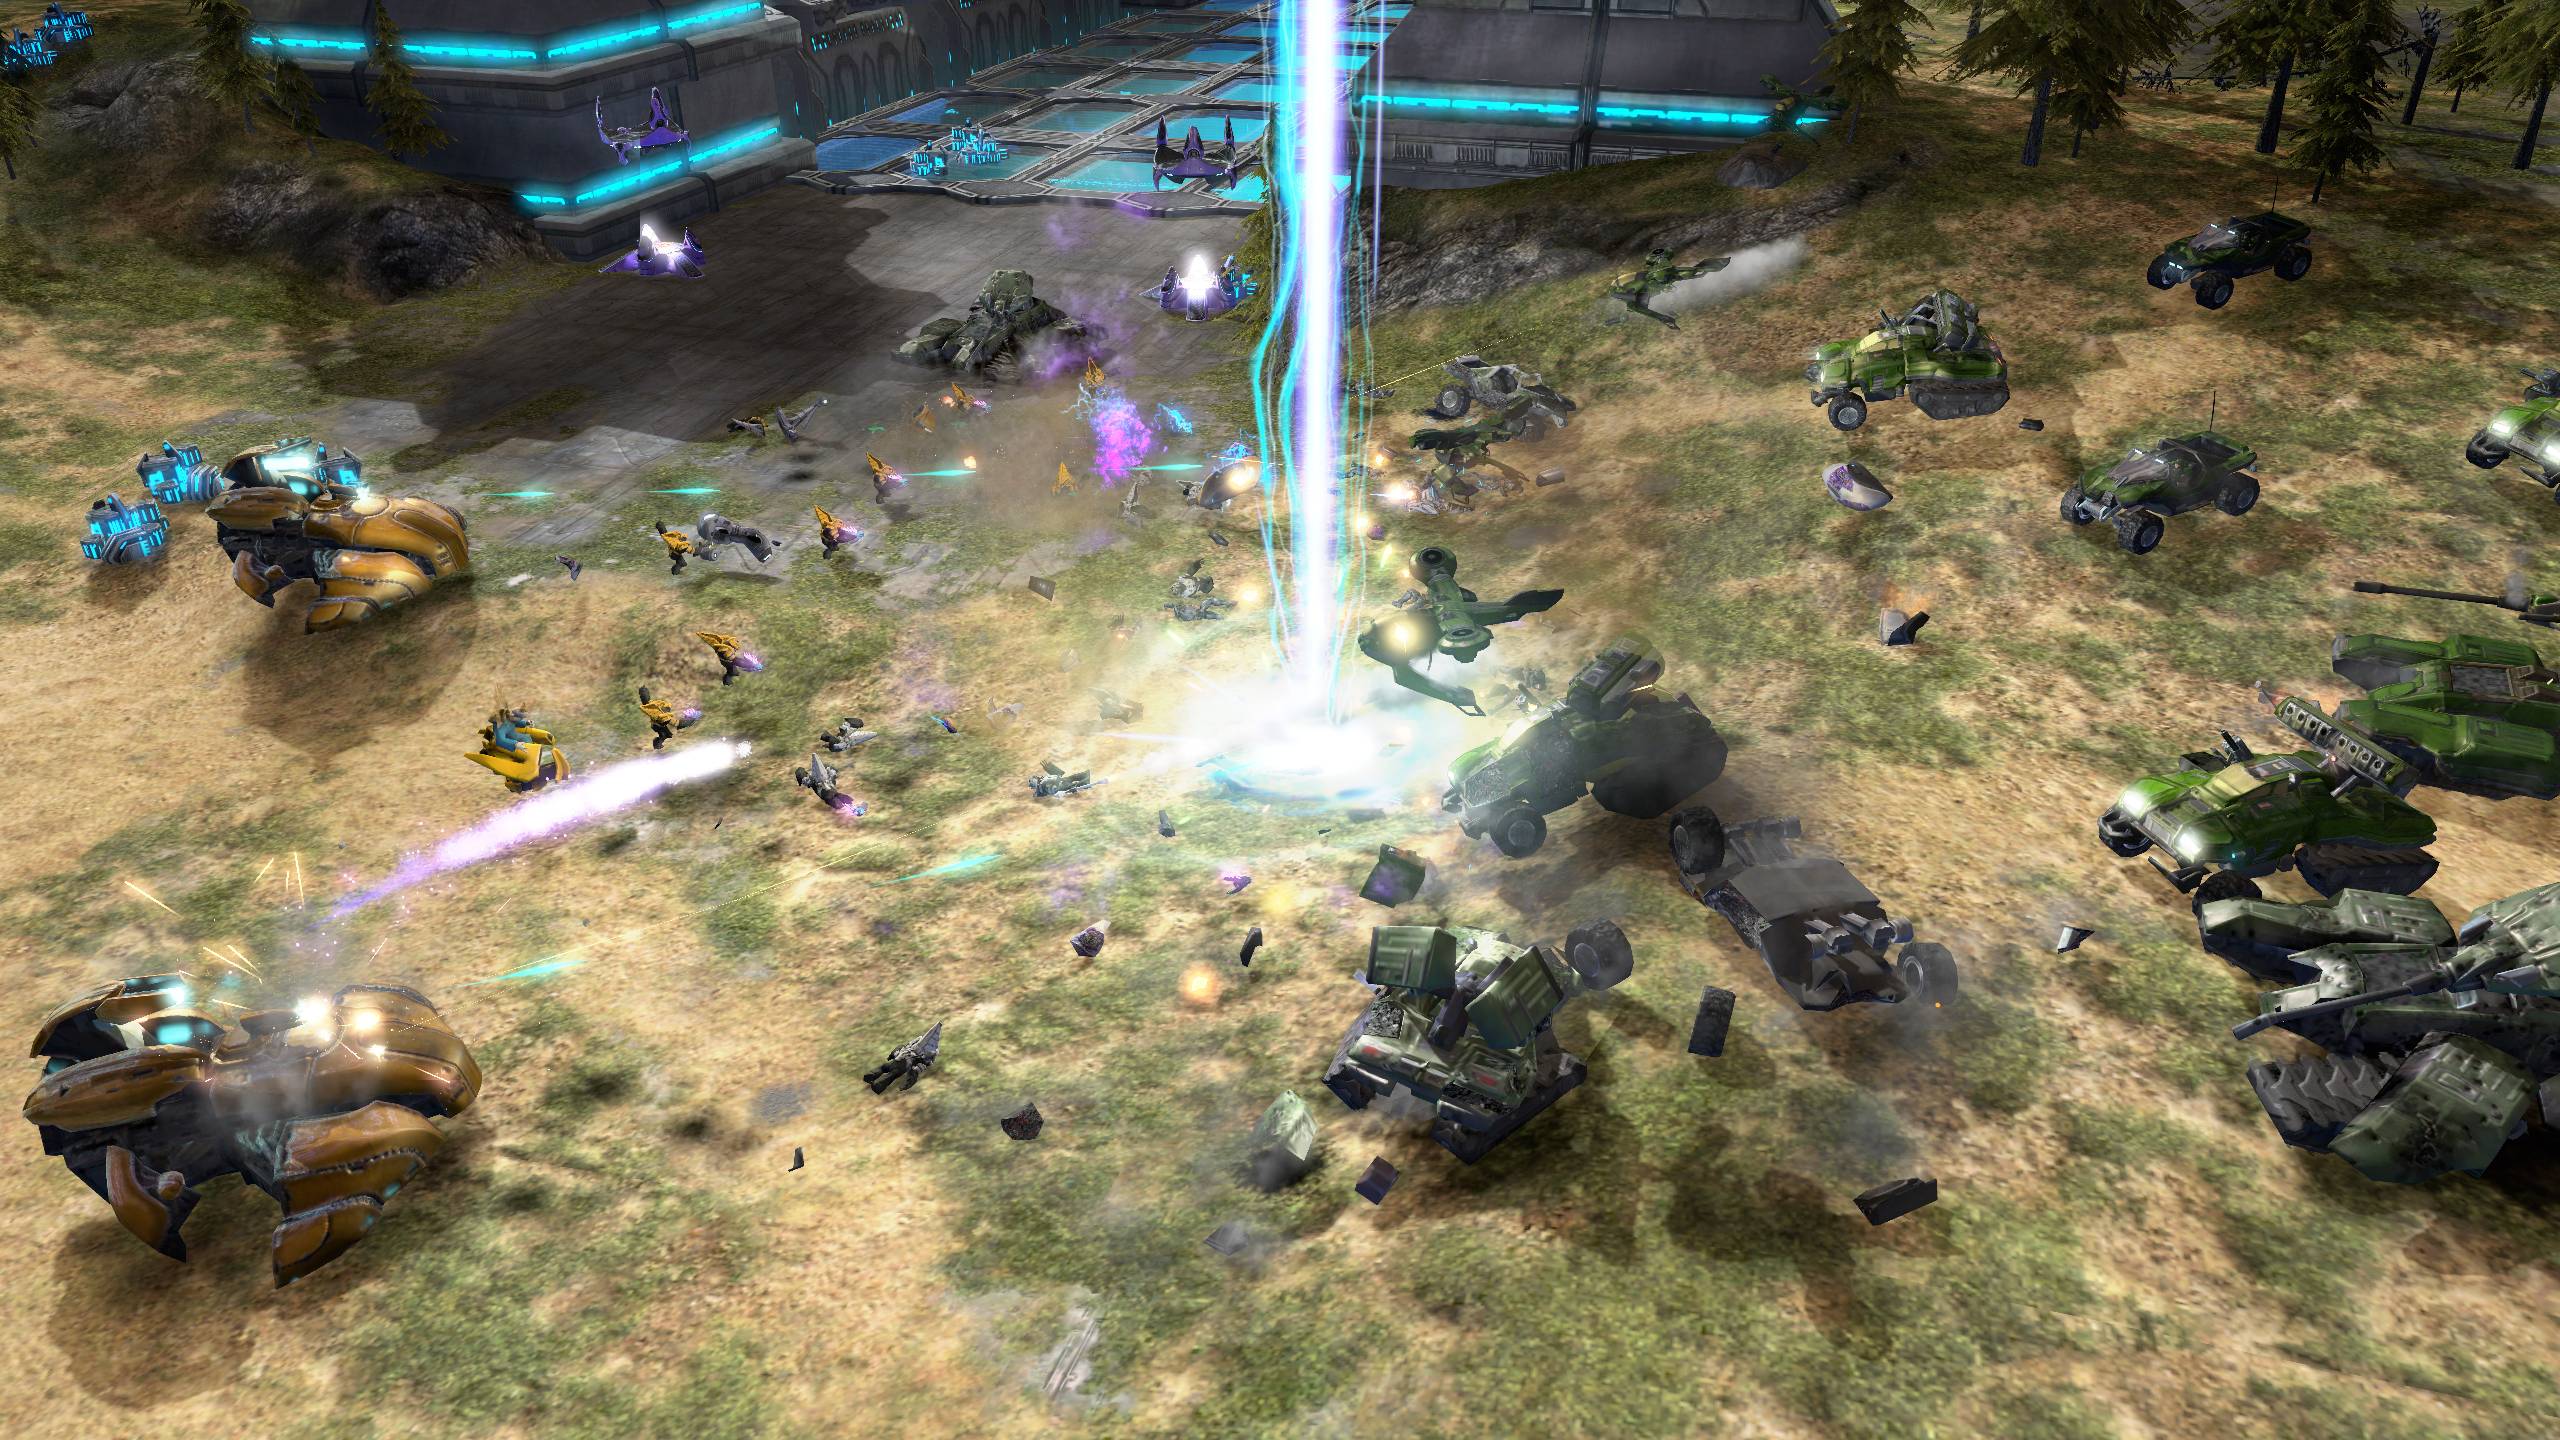 Halo Wars is released